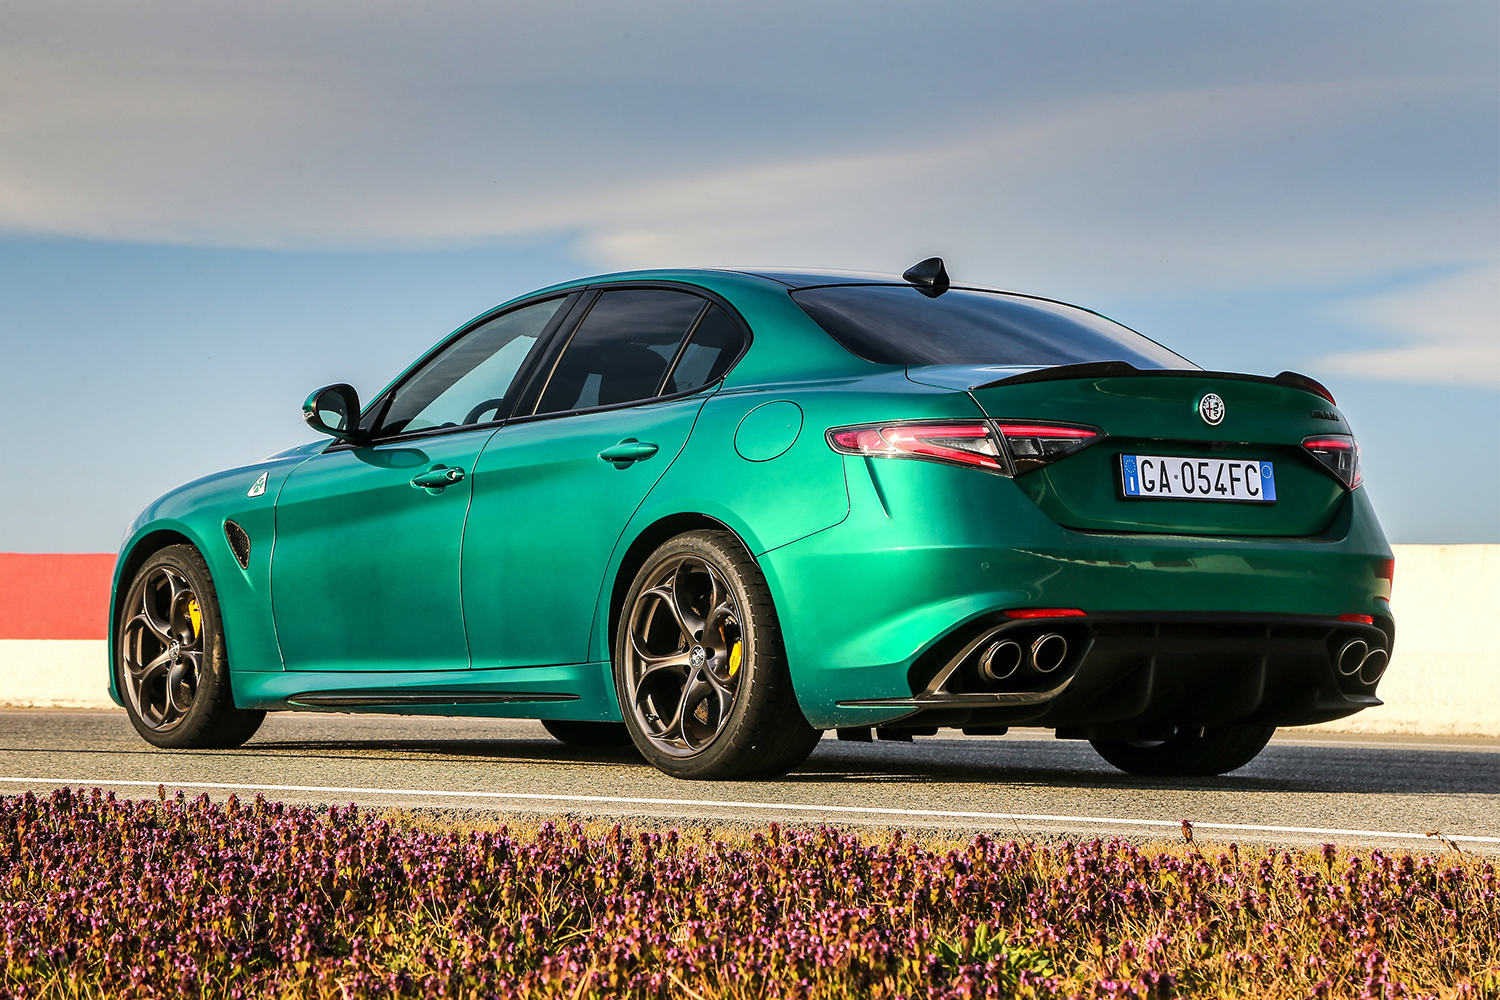 The 2021 Alfa Romeo Giulia Quadrifoglio sport sedan in green shot from the back left sitting on a racetrack surrounded by grass